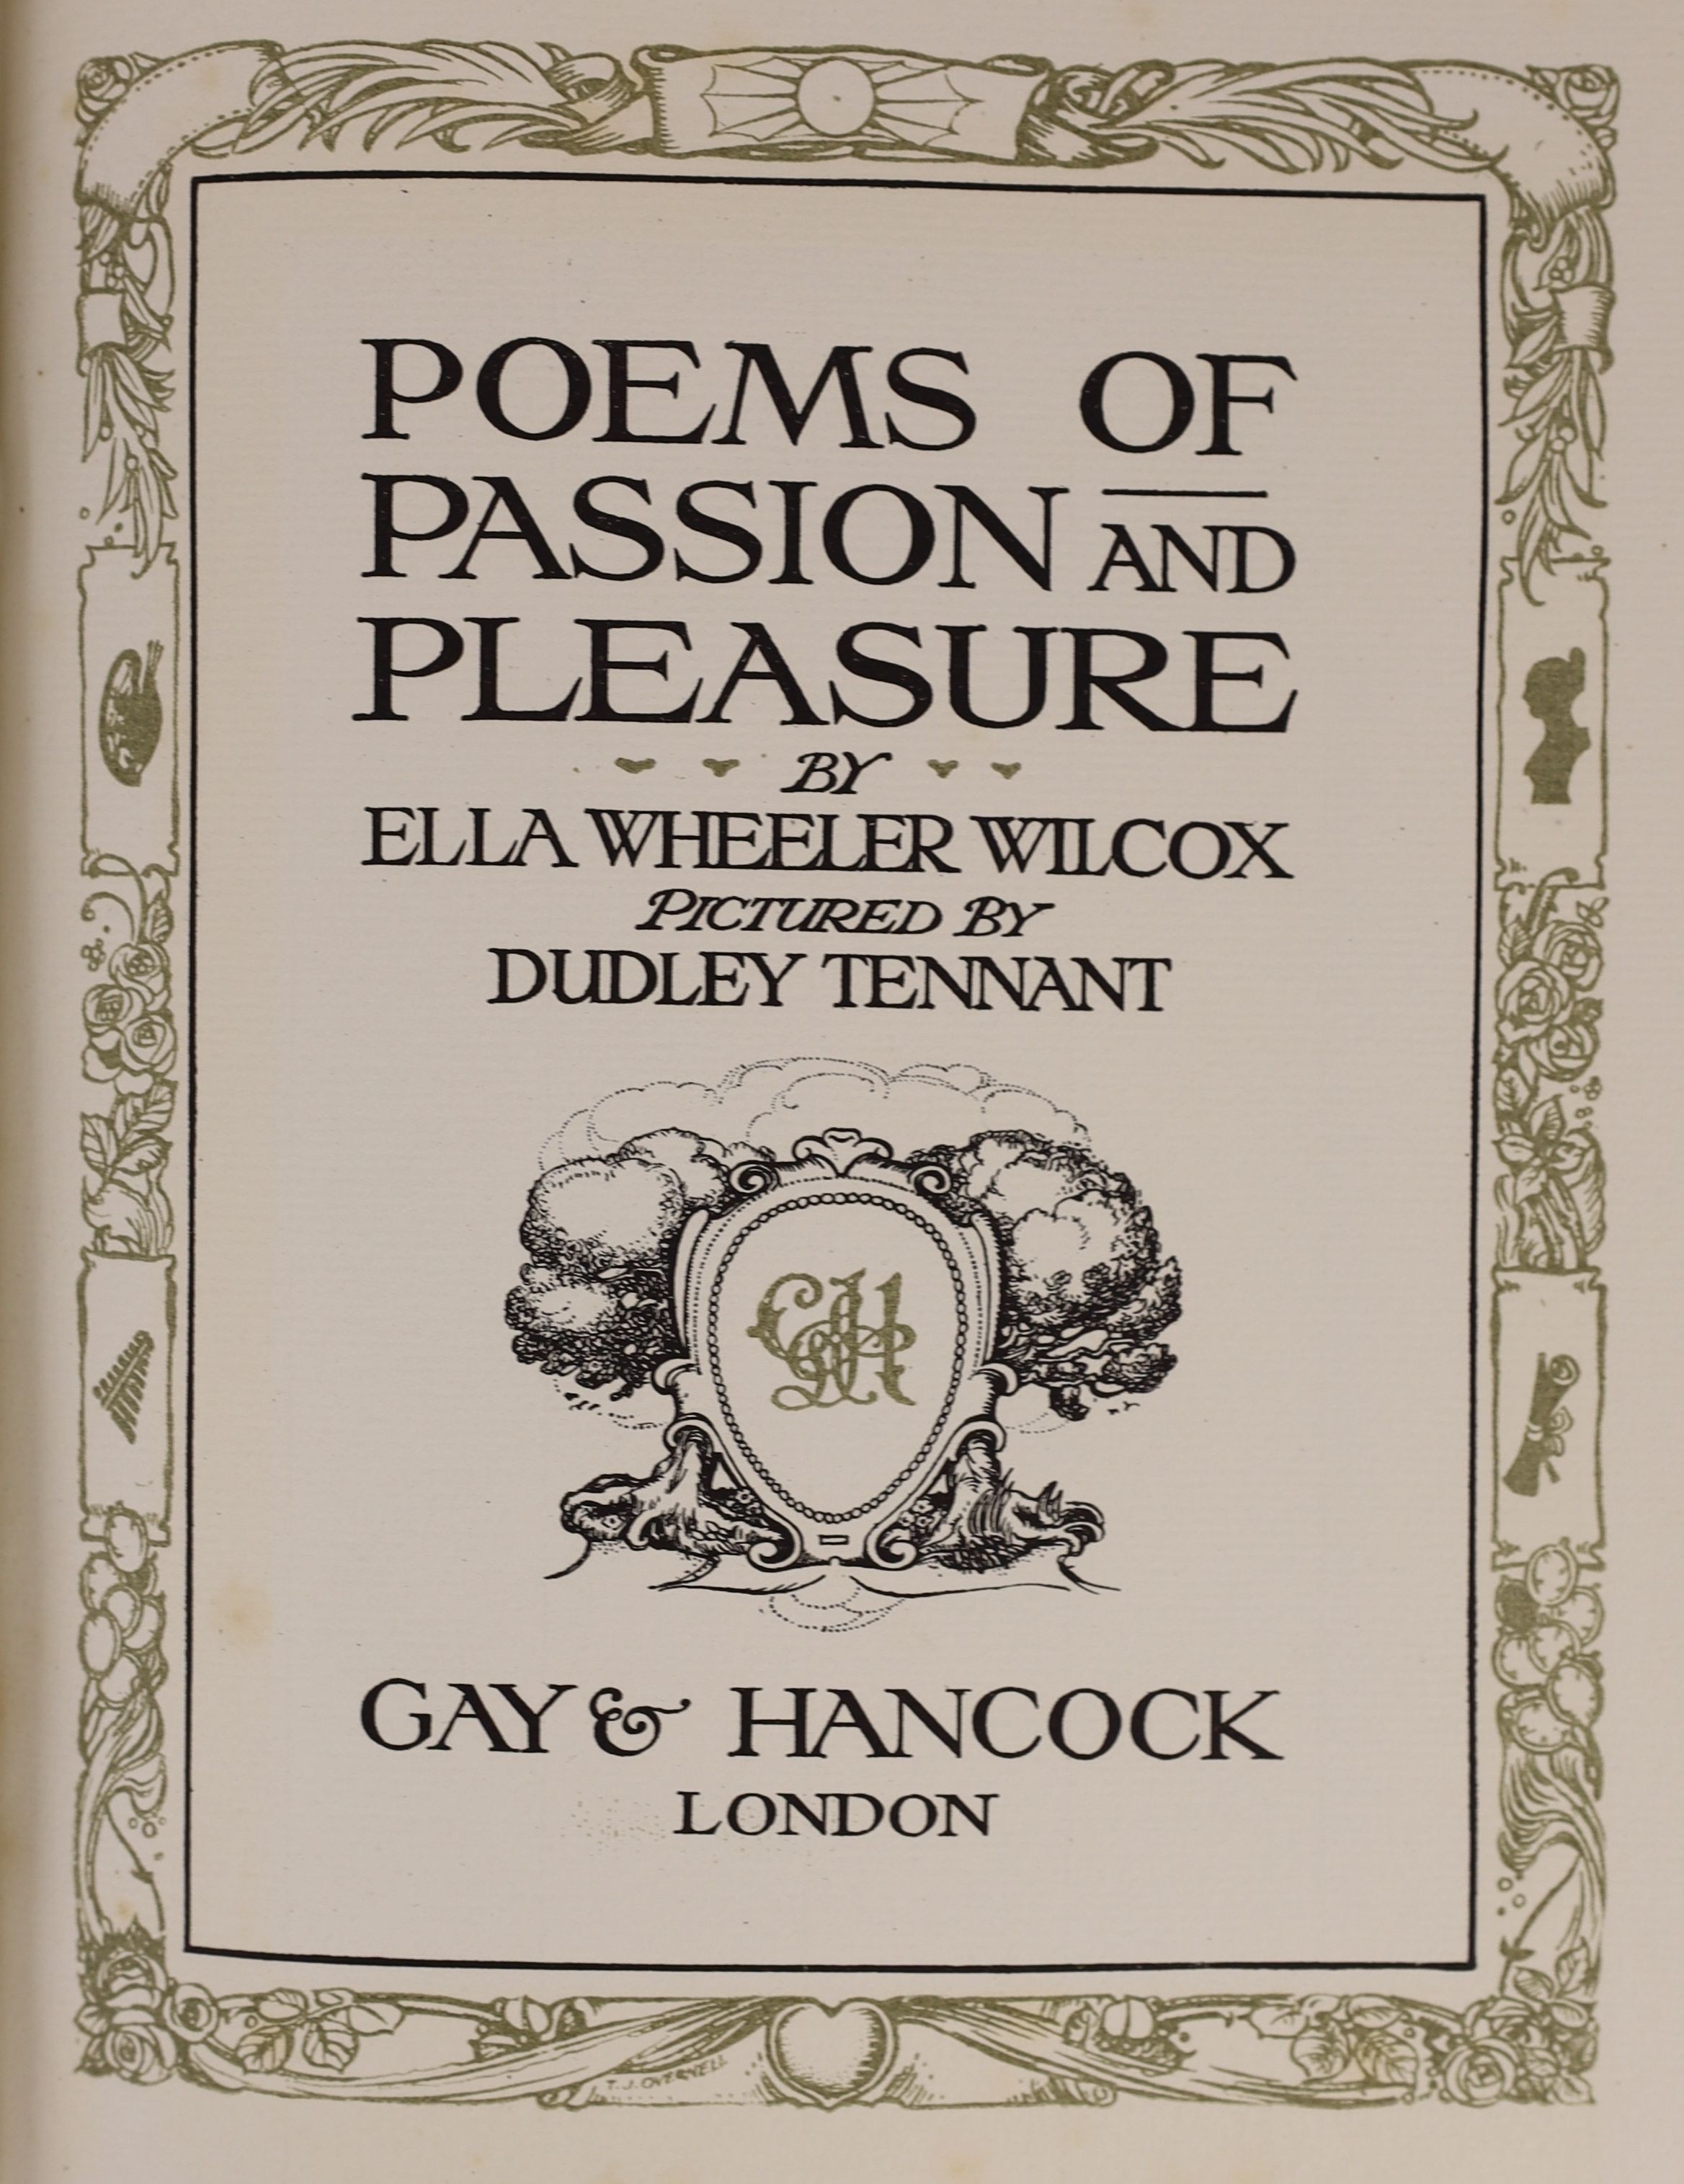 Wilcox, Ella Wheeler - Poems of Passion and Pleasure, de luxe issue, one of 500, signed by the poet and the illustrator, Dudley Tenant, with 20 tipped-in colour plates, 4to, vellum gilt, Gay and Hancock, London, [1912]